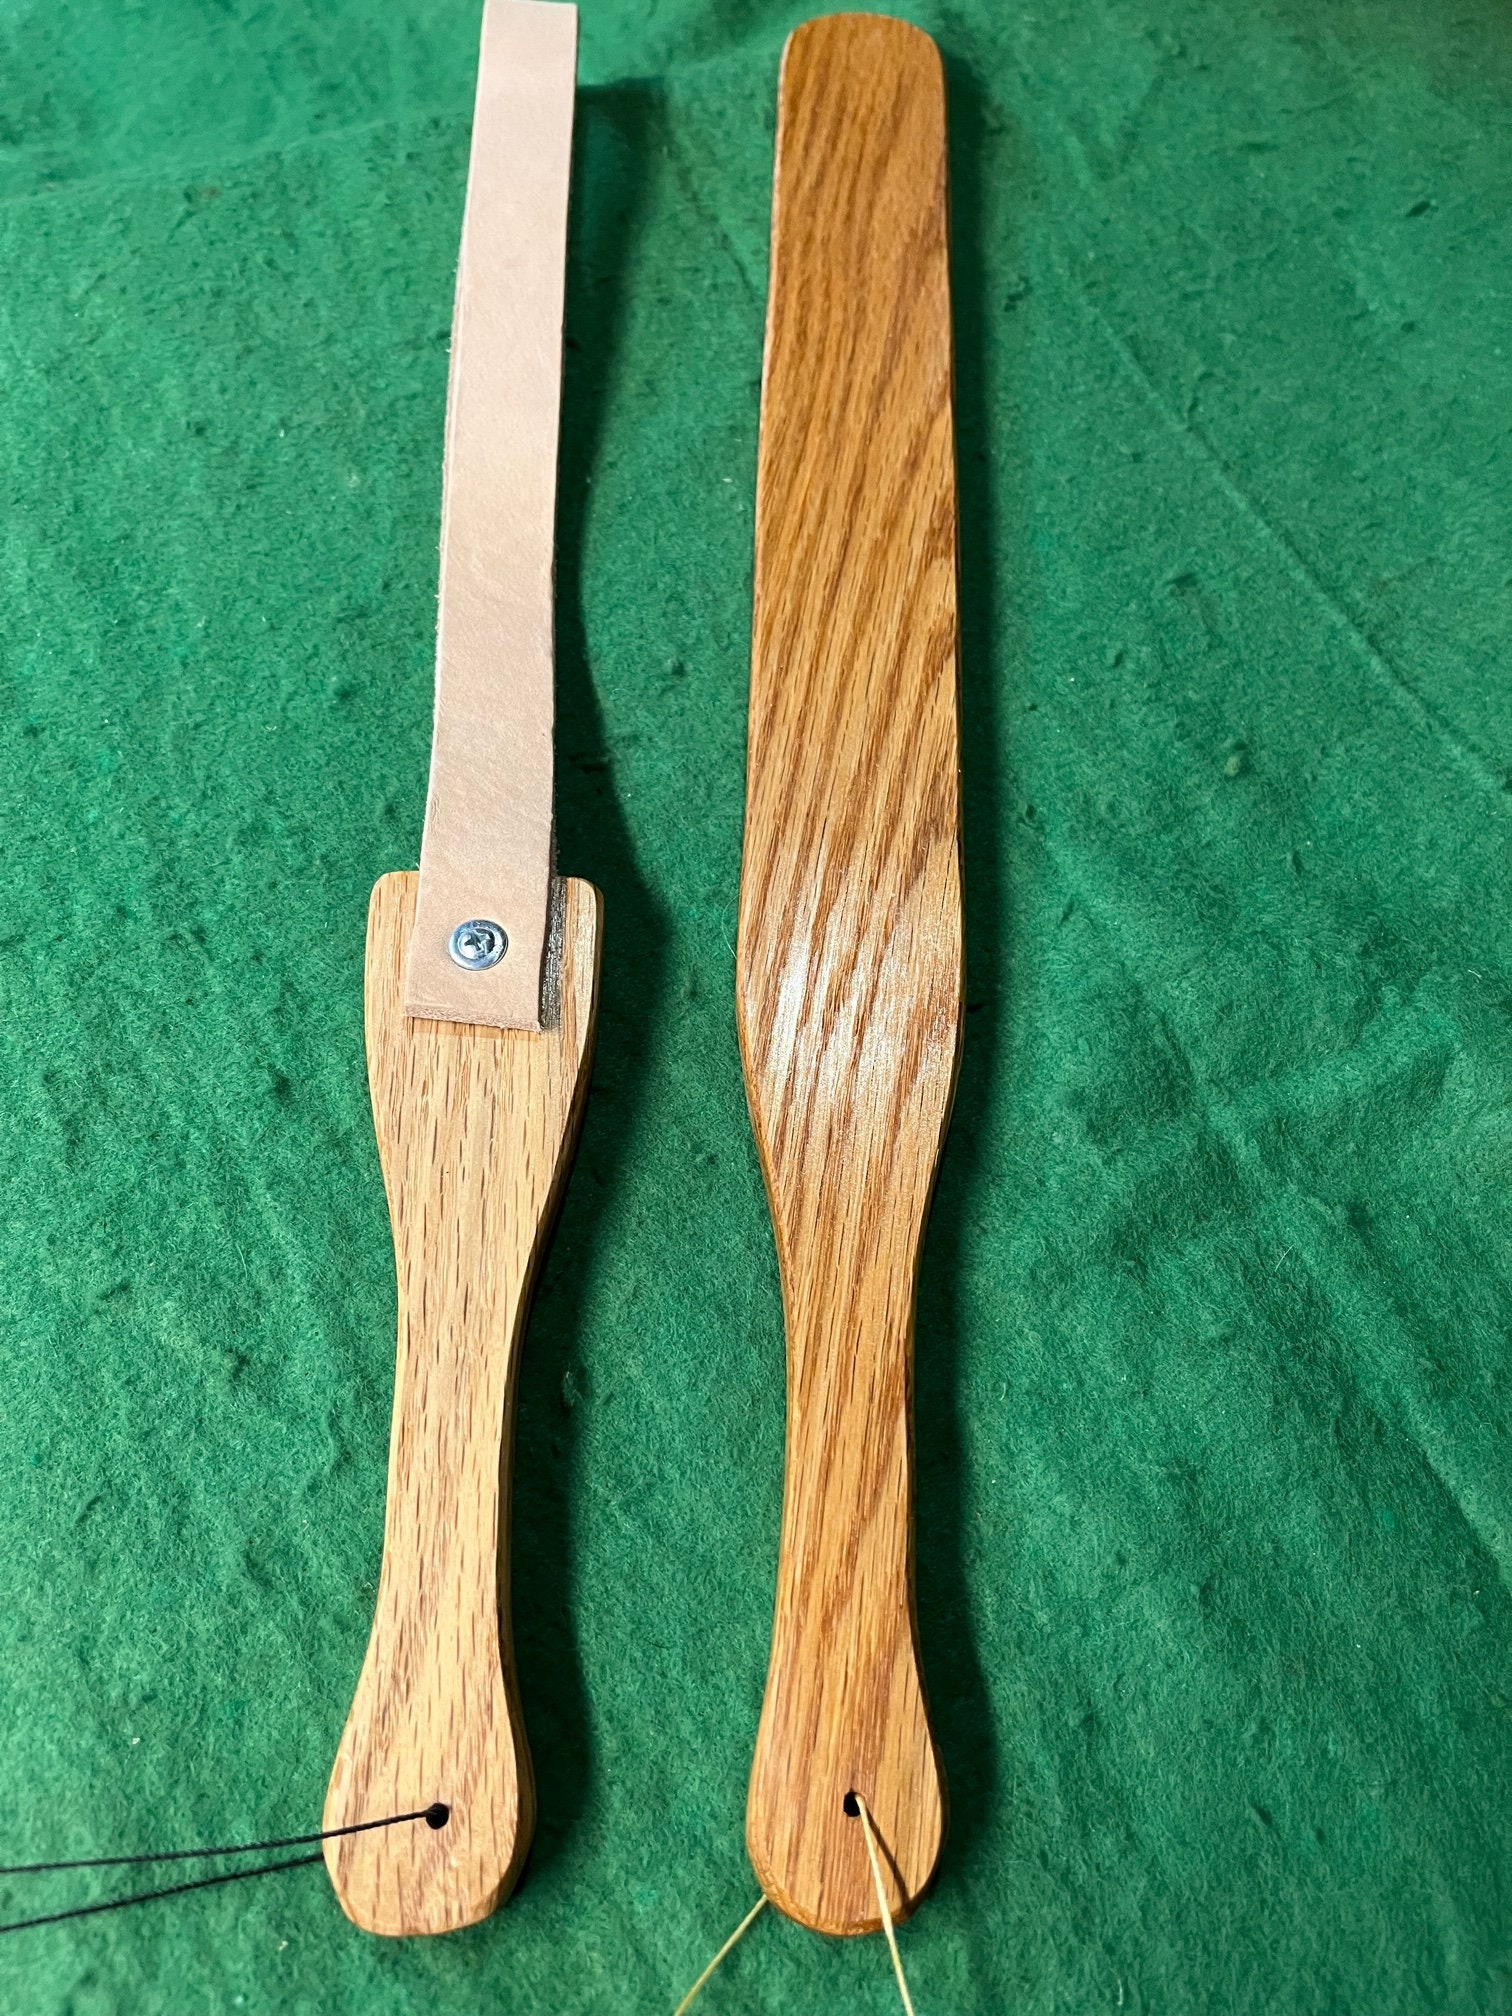 With Wooden Paddle Spanking Videos - Spanking Paddle and Belt Principle's Office Set Brand New - Etsy